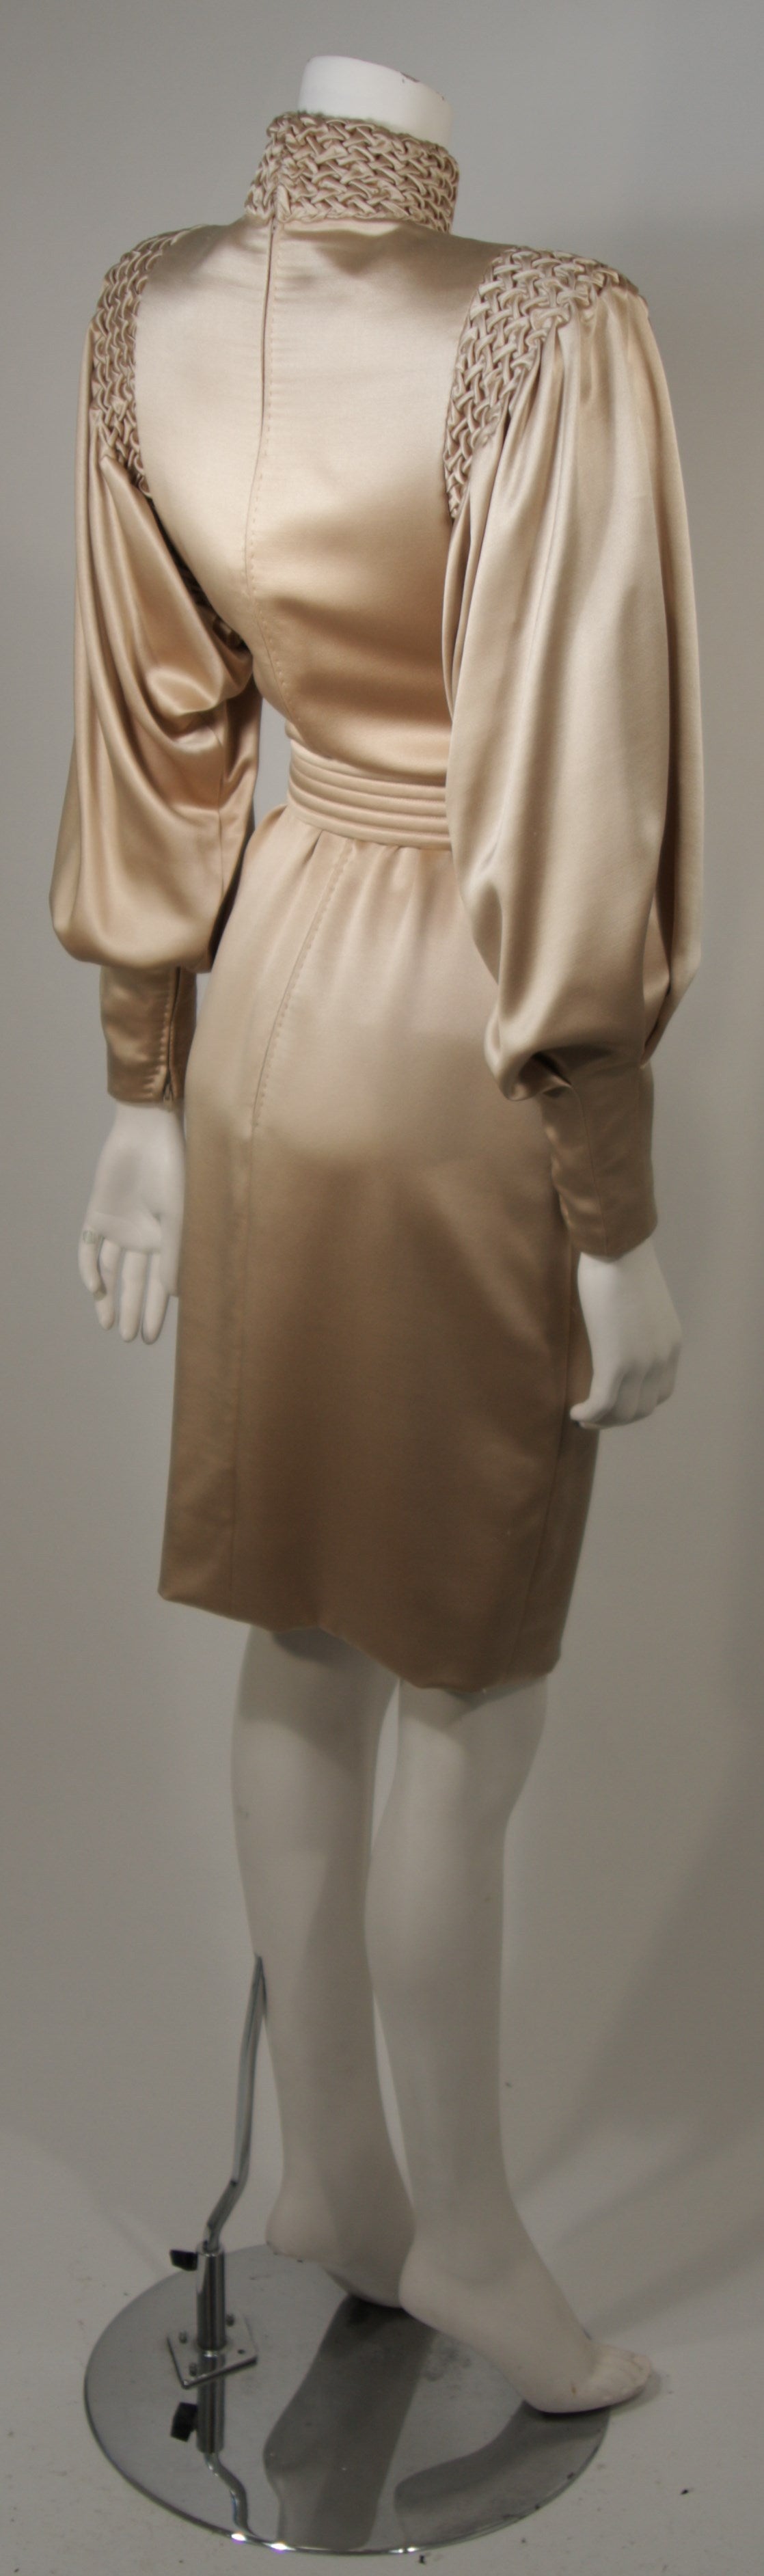 Galanos Silk Champagne Cocktail Dress with Ruched Details and Belt Size 2-4 2